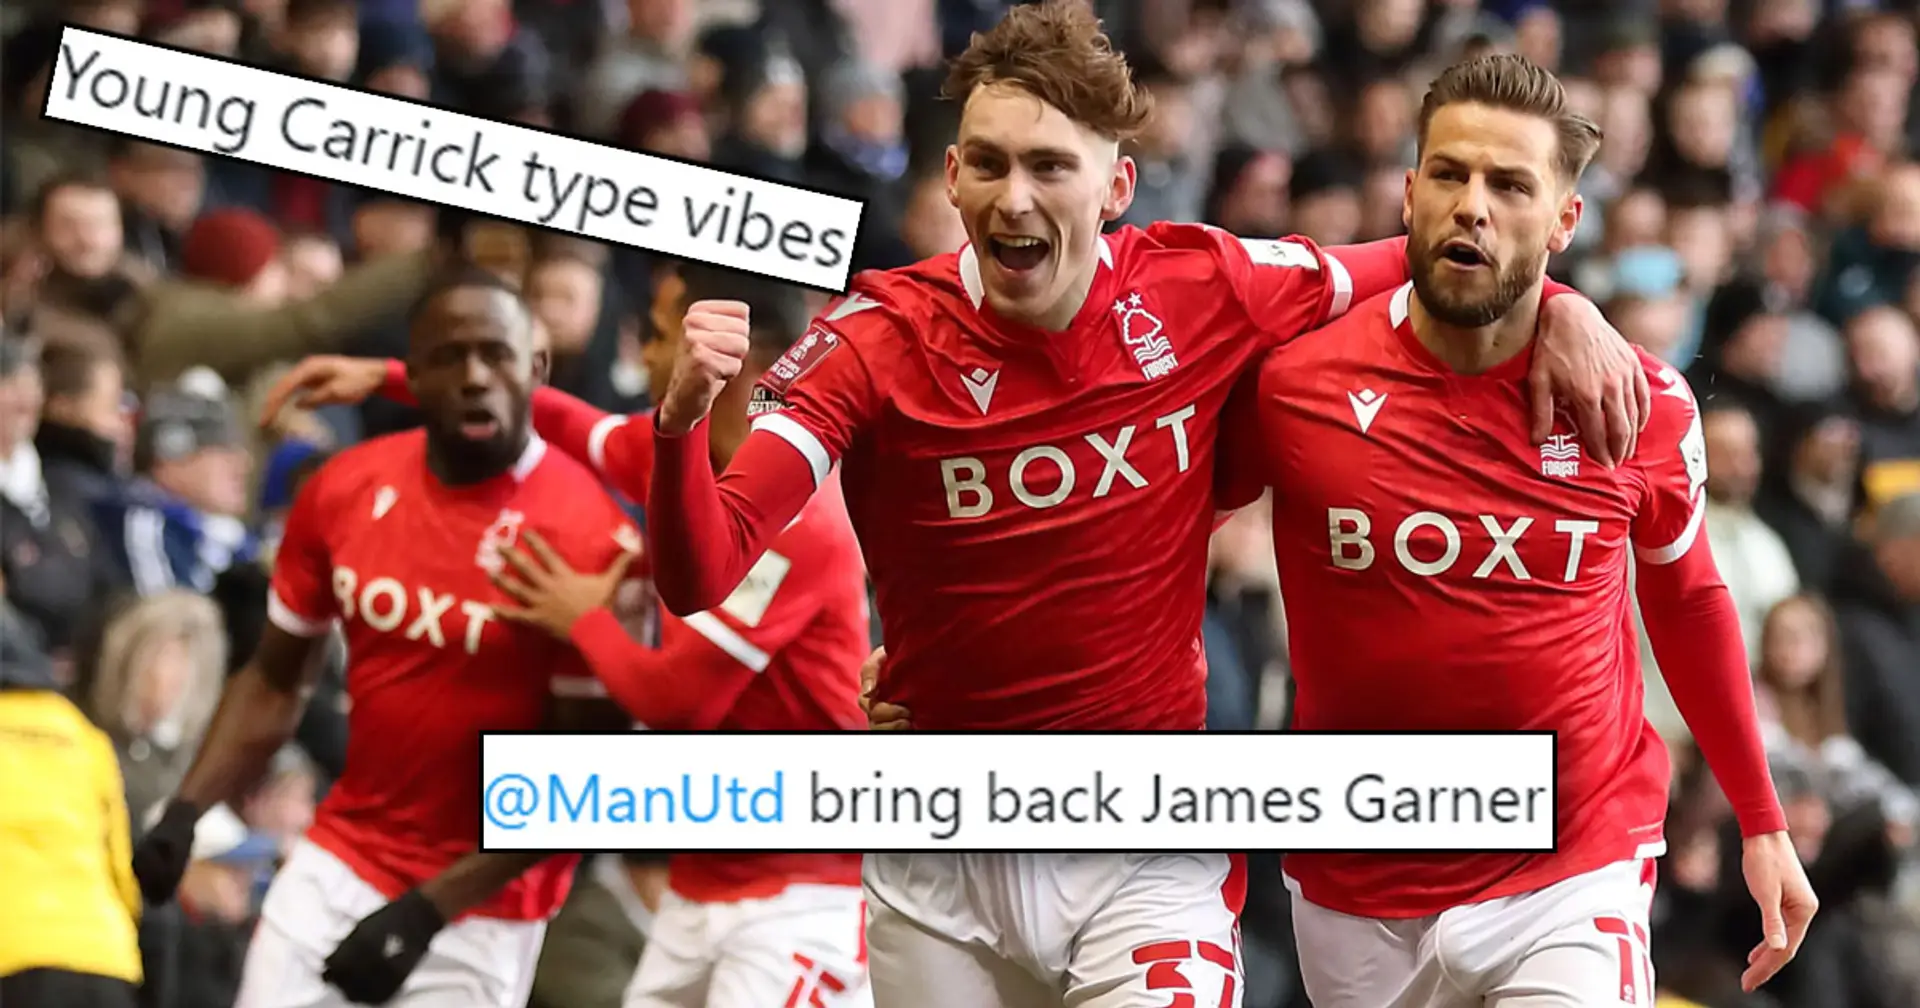 'Better than what we currently have': United fans send message to Garner as he helps eliminate FA Cup holders Leicester City